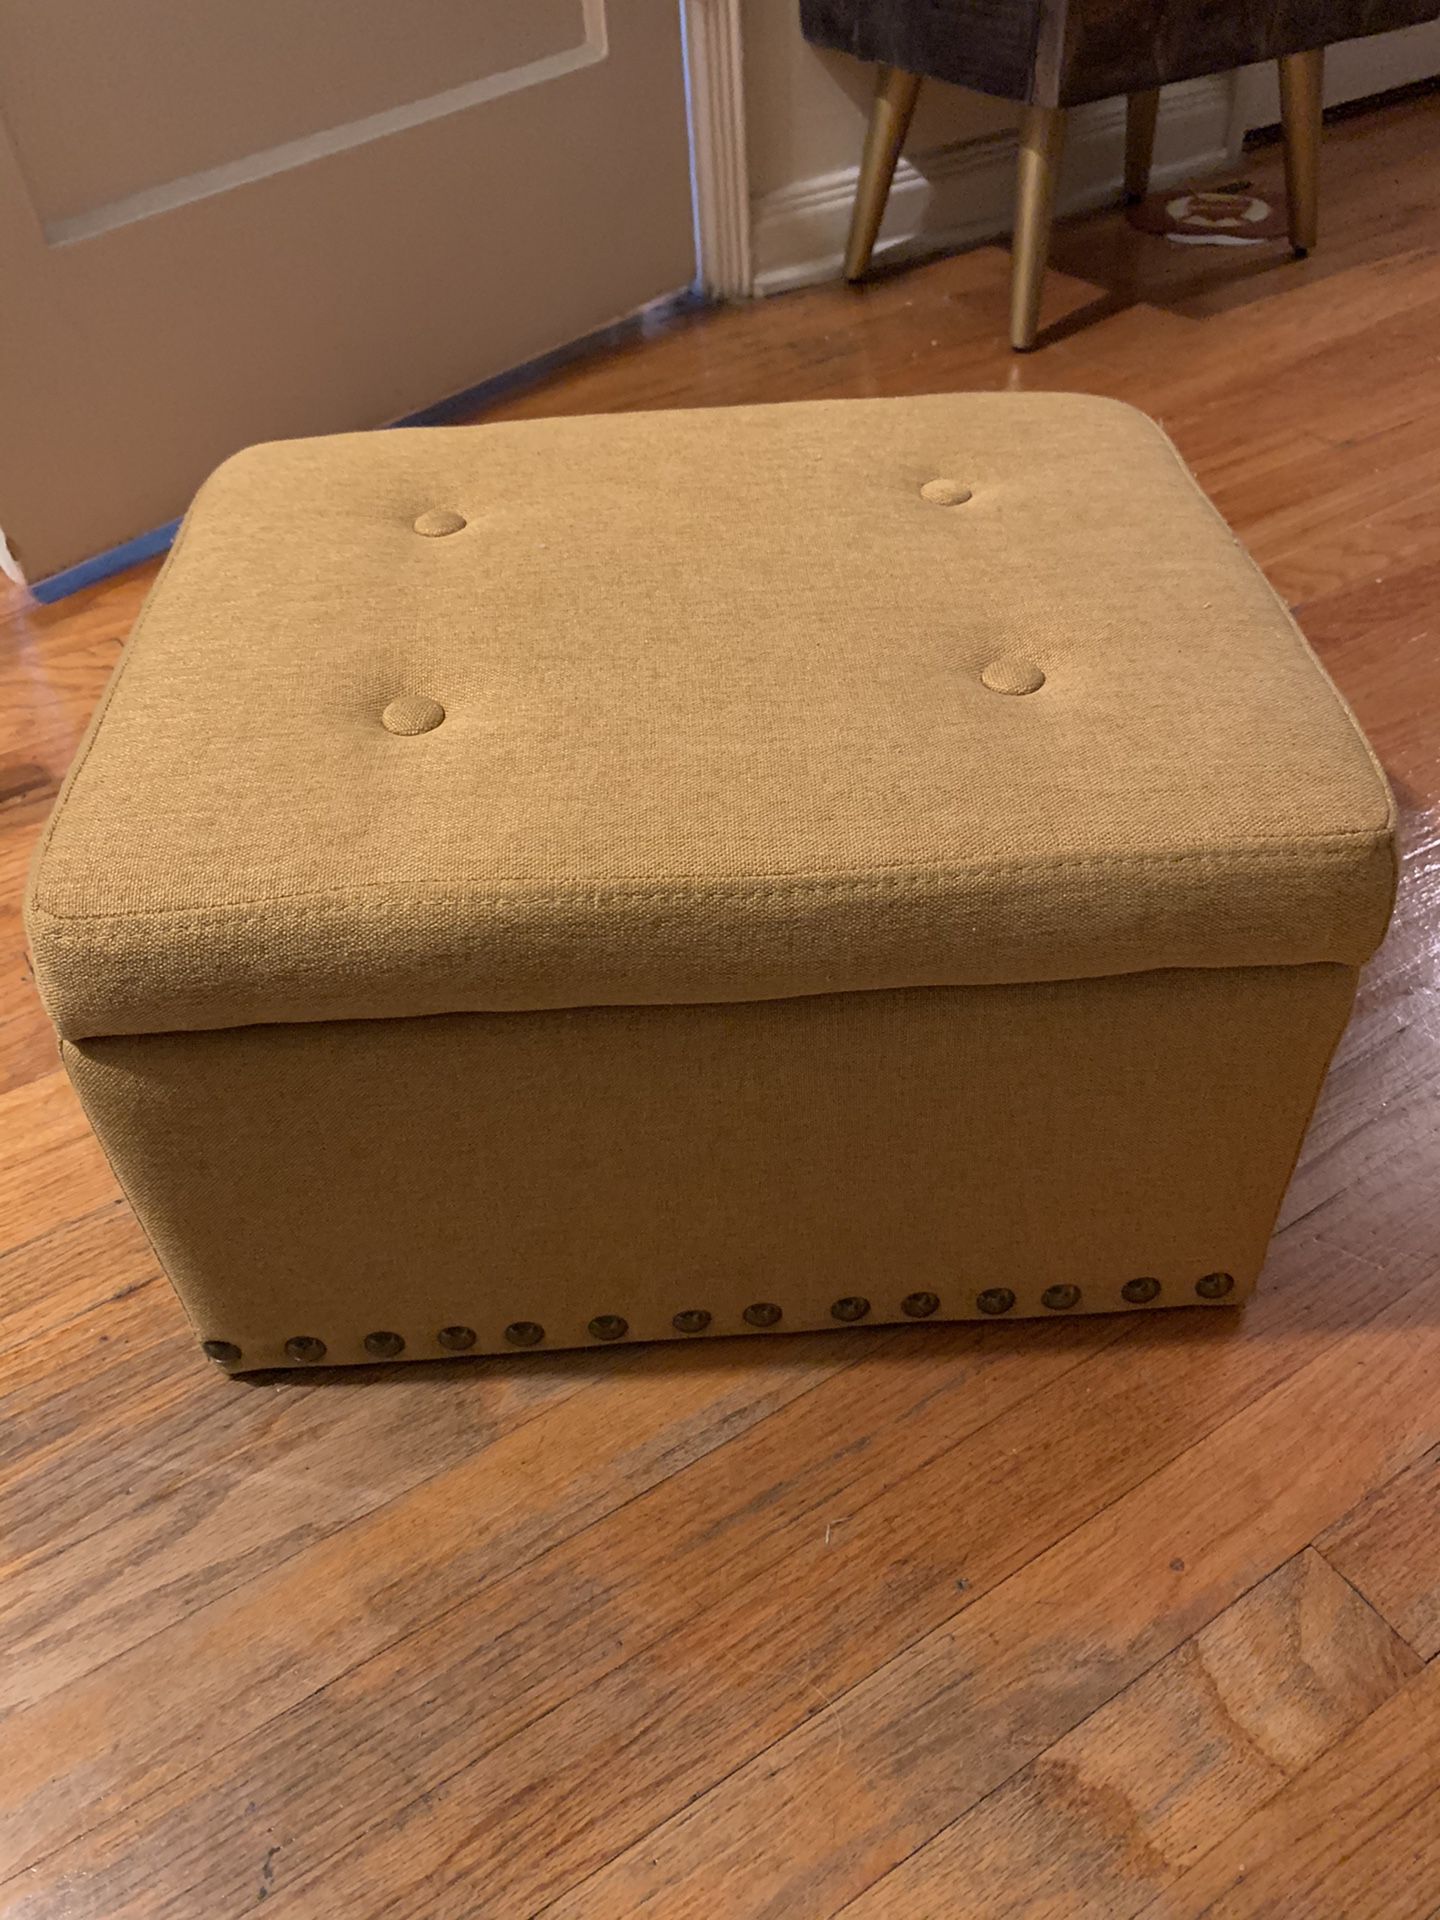 Small Mustard Yellow Storage Ottoman with Brass Accent Buttons at Bottom